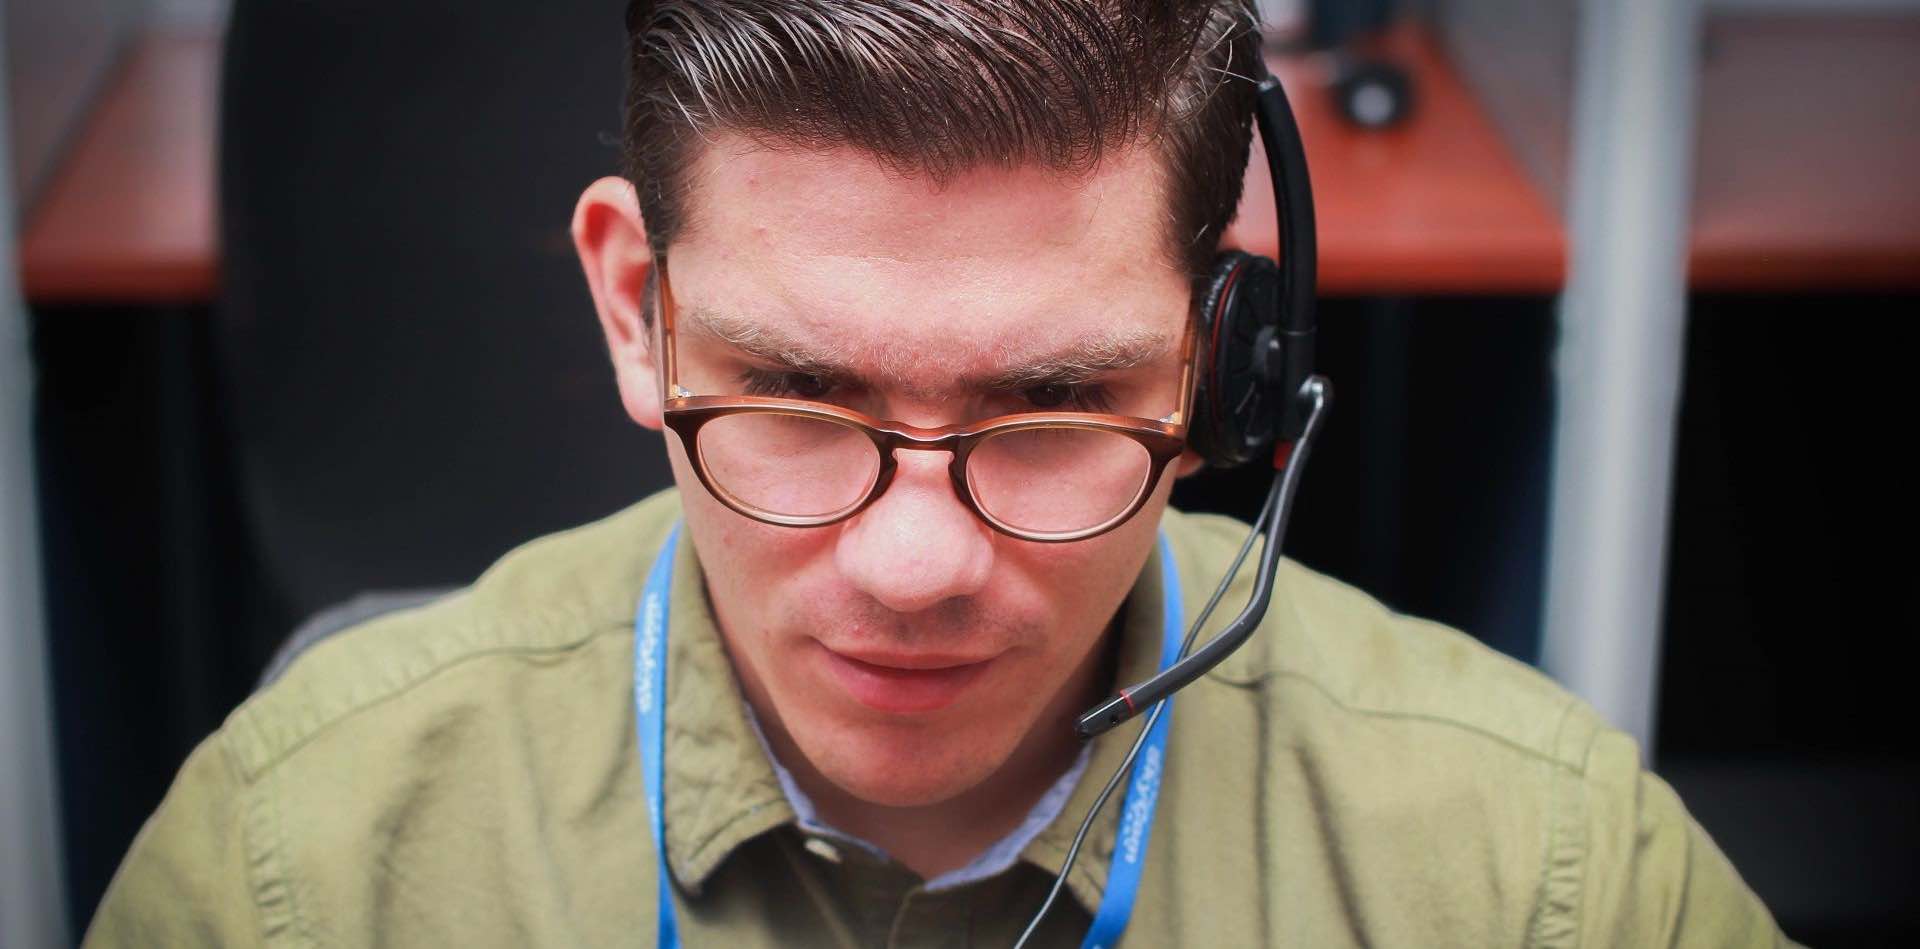 Male agent with glasses, green shirt and headset looking down while working